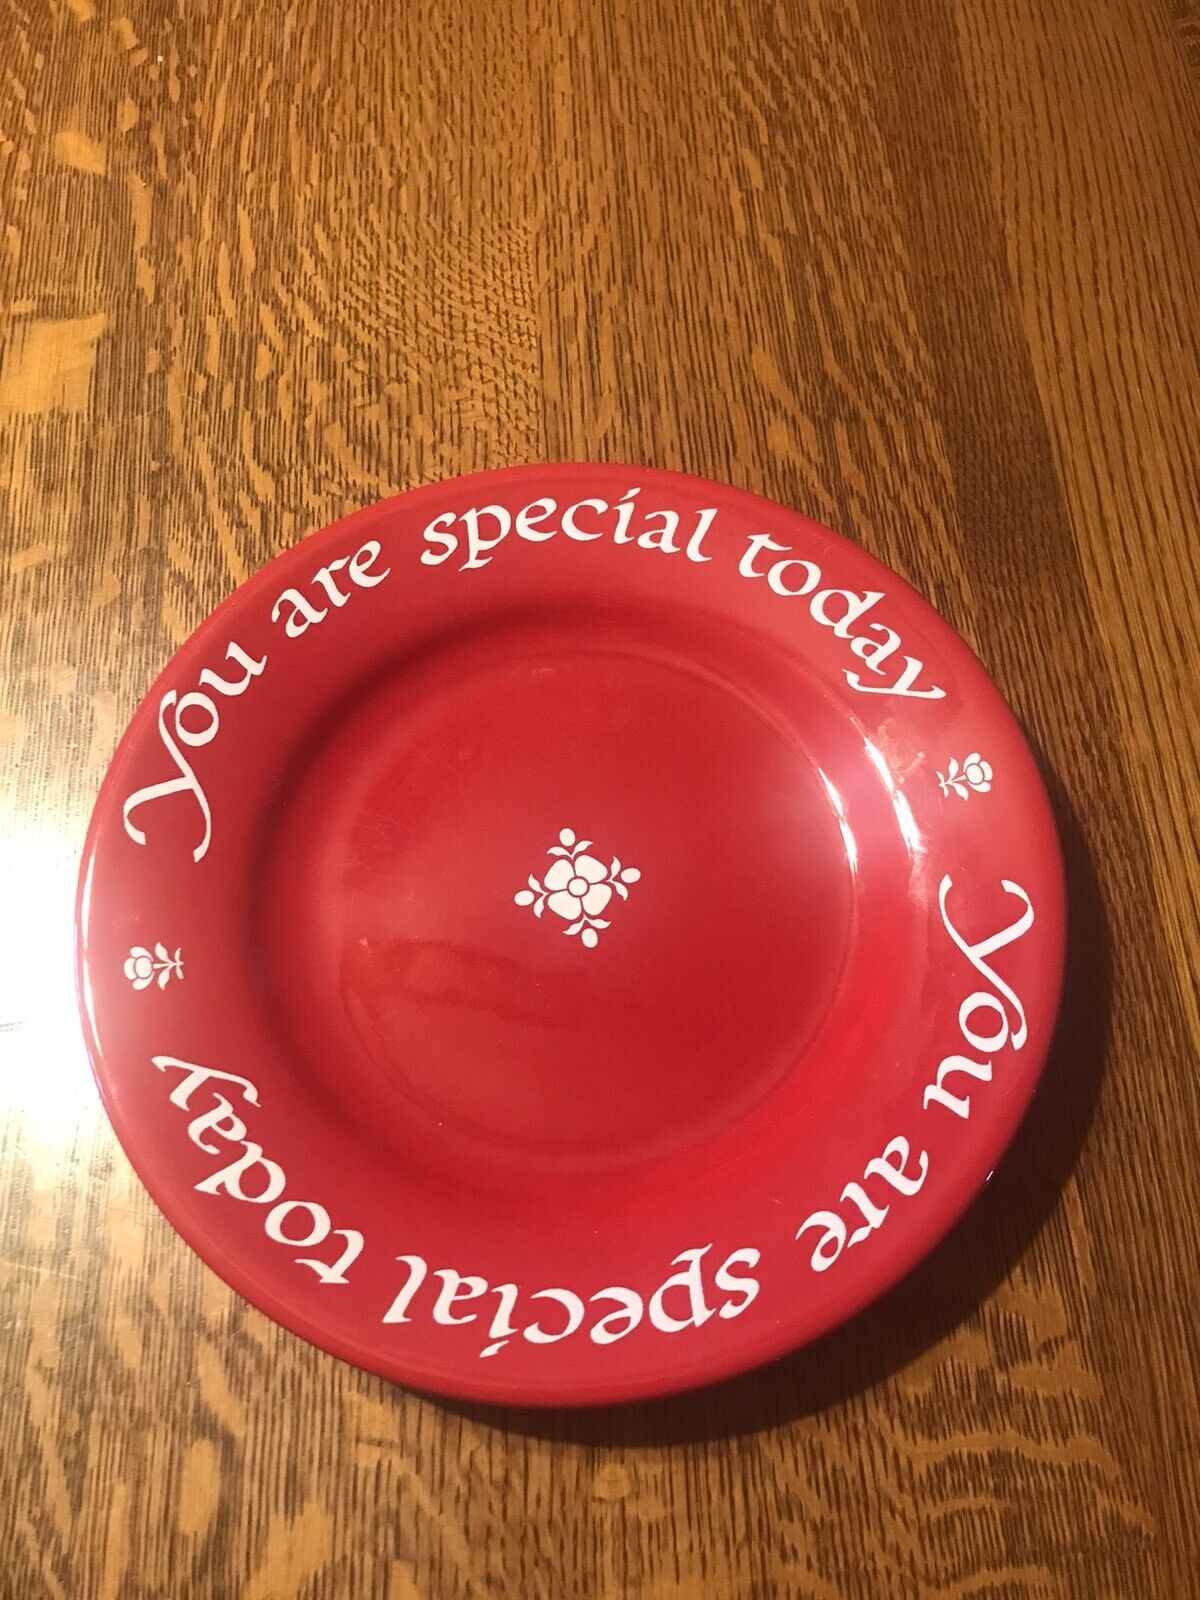 You Are Special Today Plate by Original Red Plate Co. 1979 CA, U.S.A.